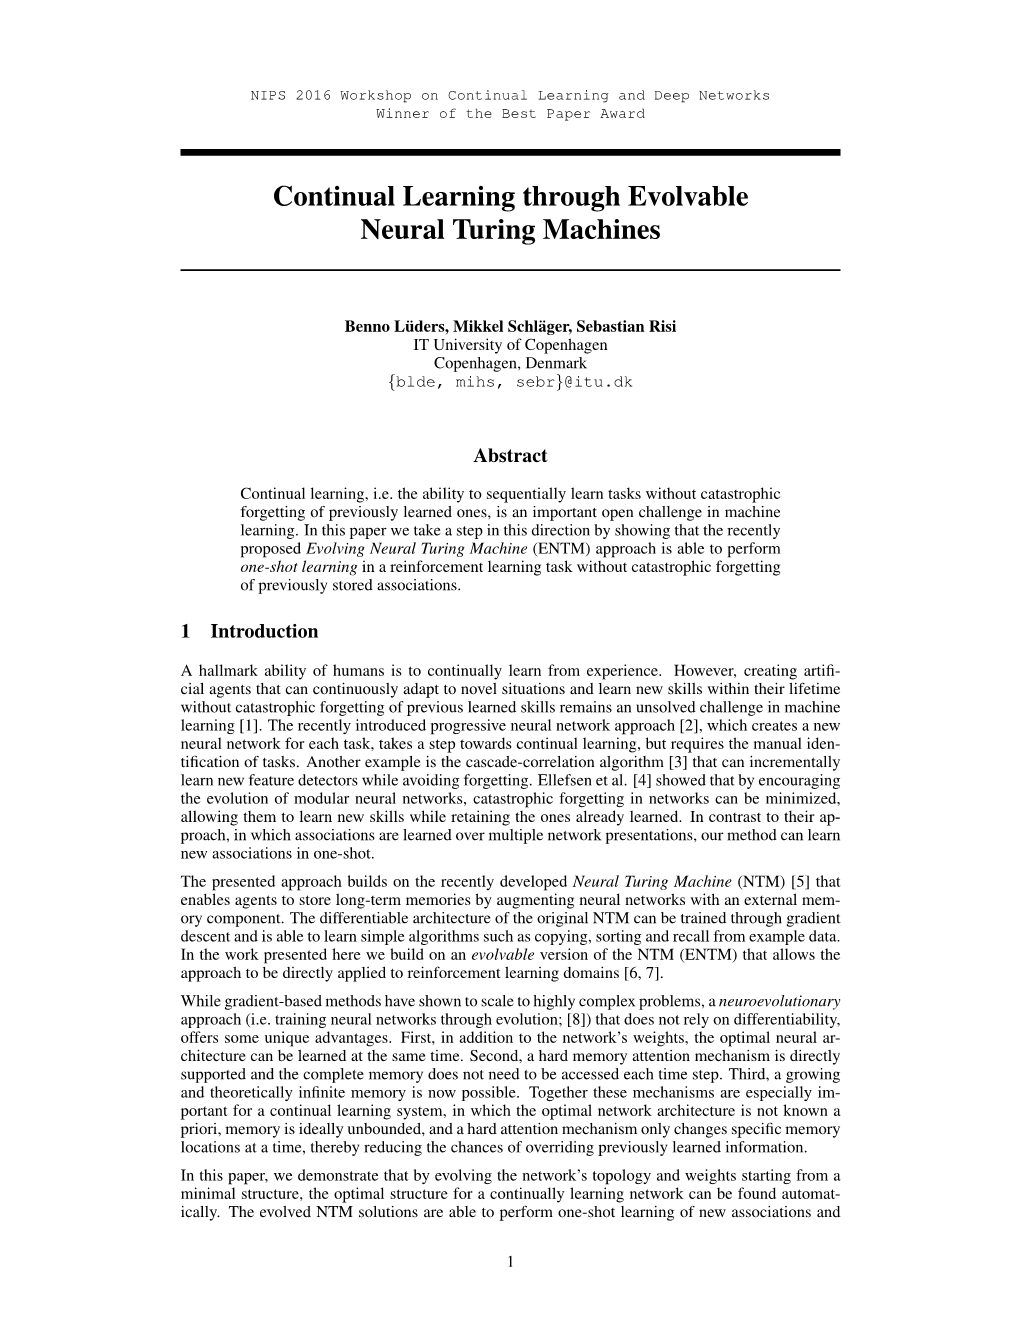 Continual Learning Through Evolvable Neural Turing Machines